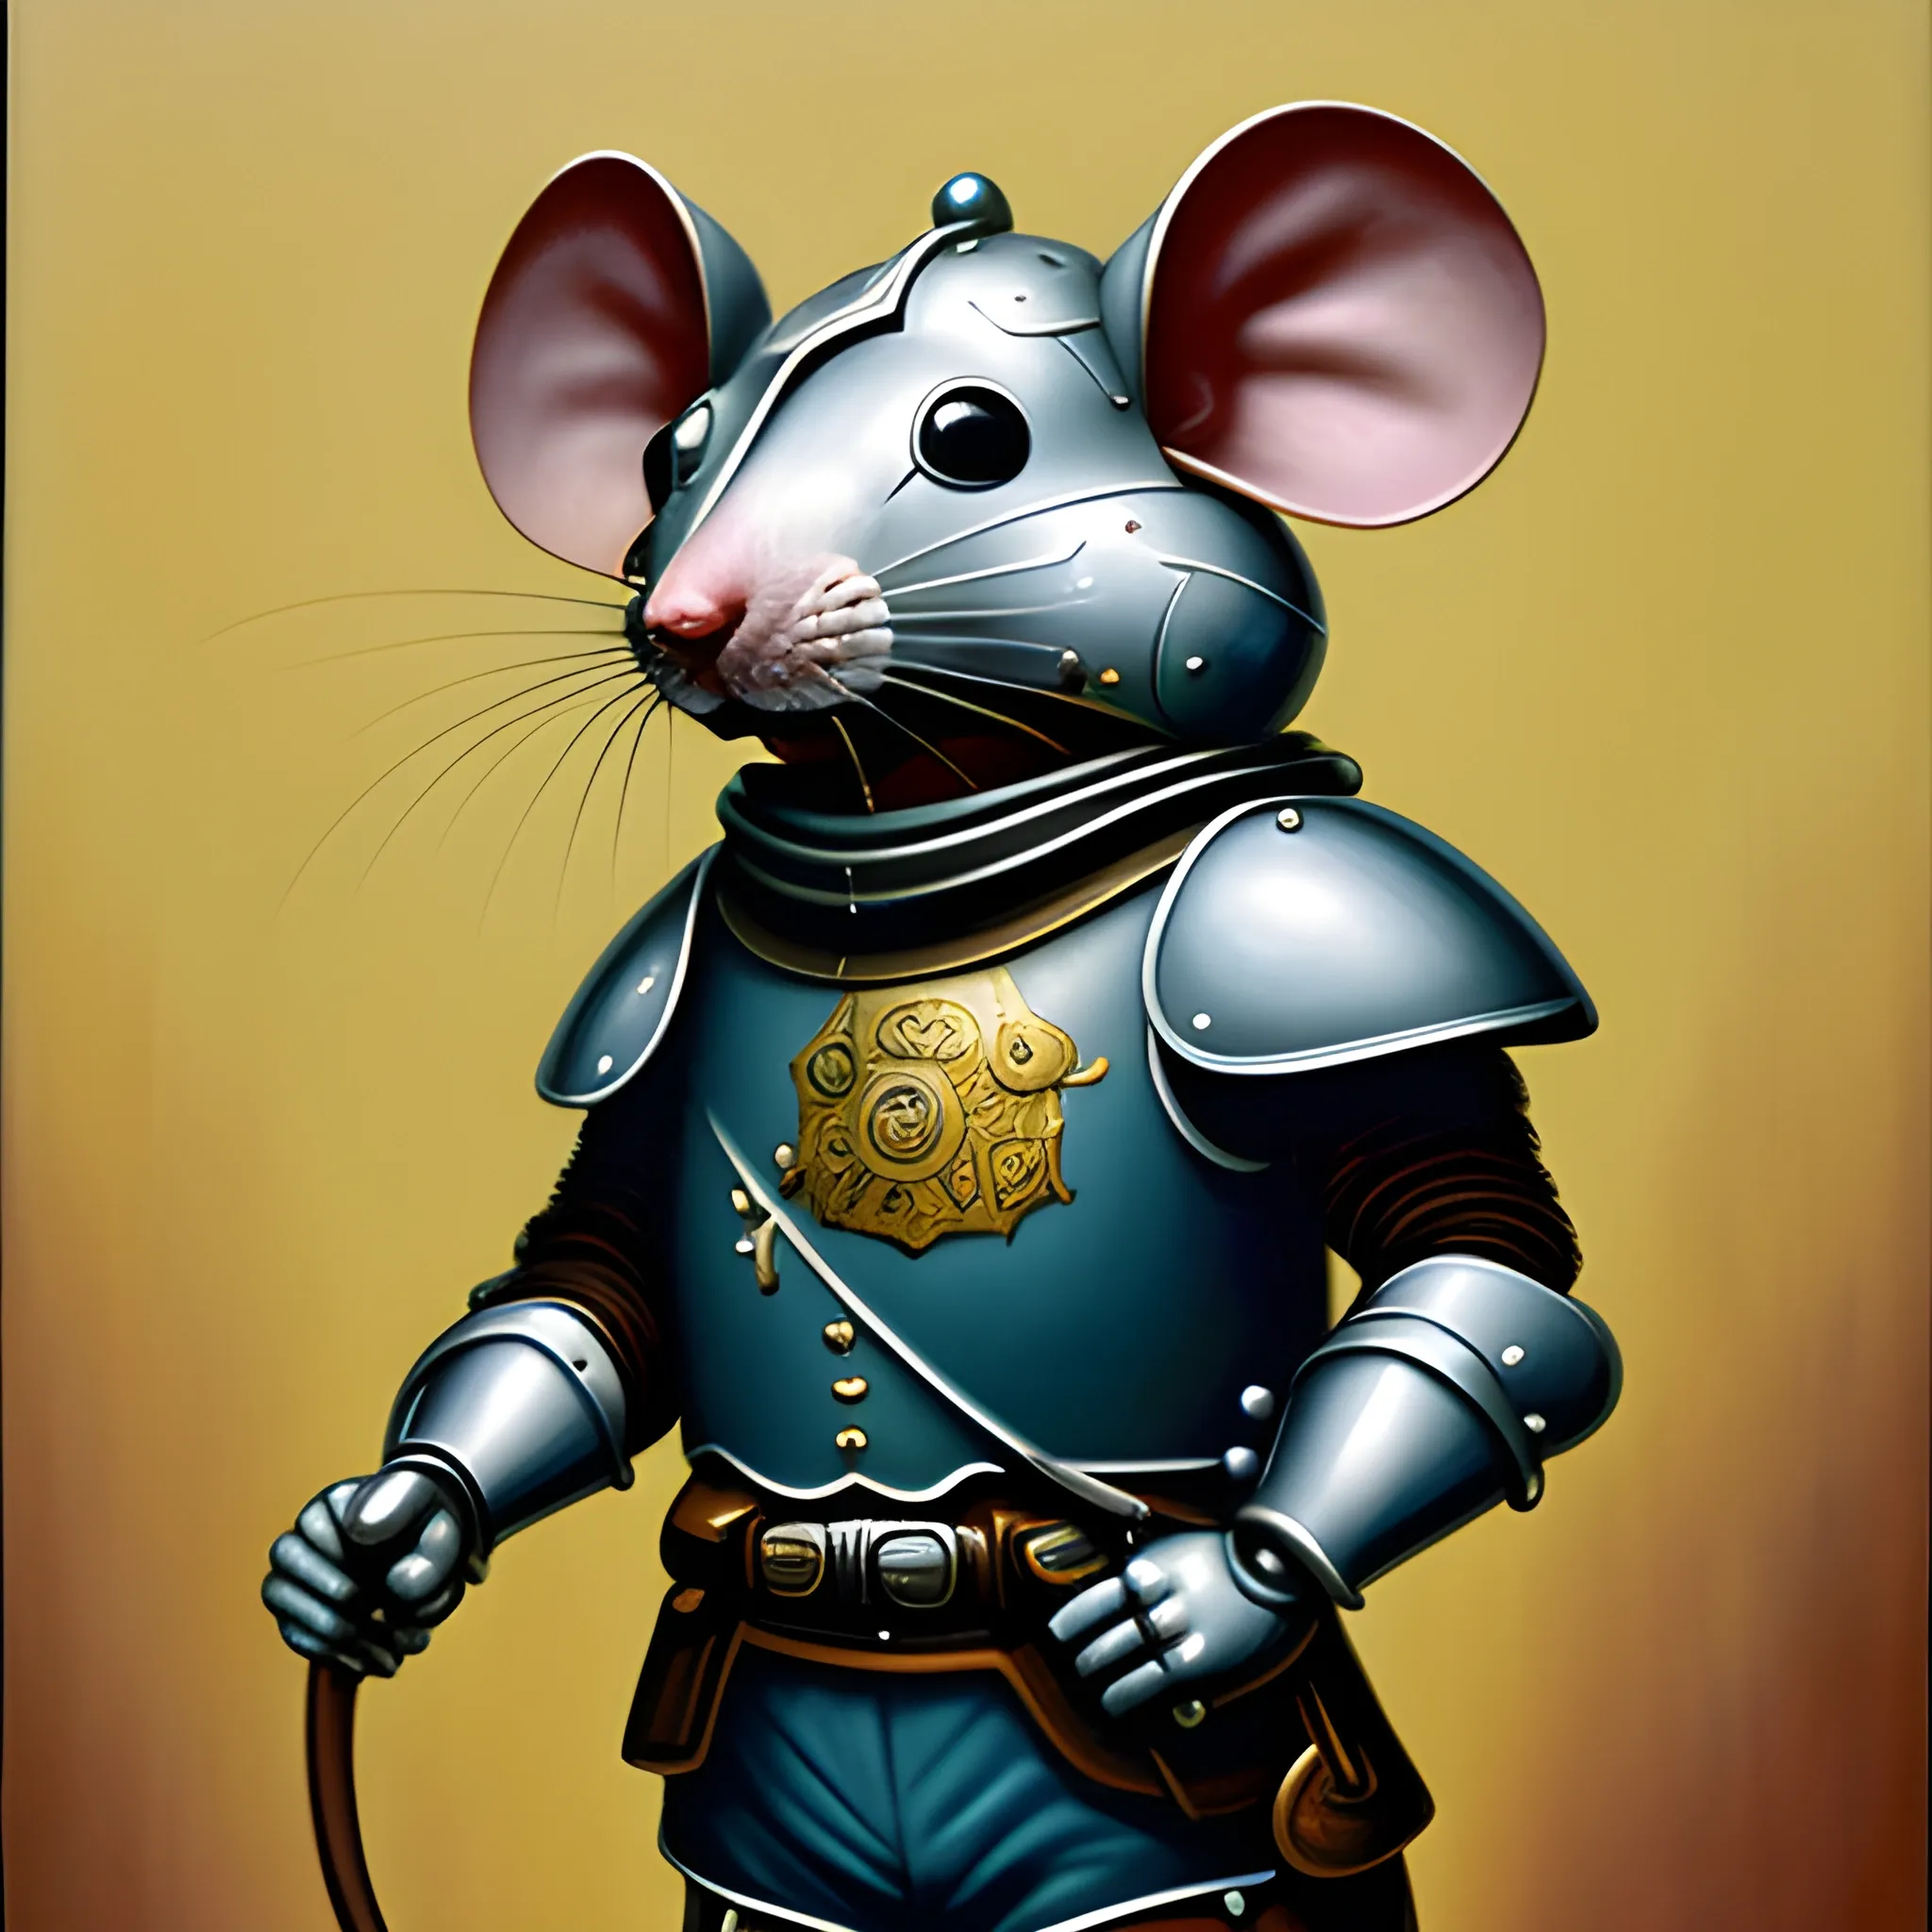 General Mouse is wearing armor. , Oil Painting, Trippy，Just like a mechanical police officer